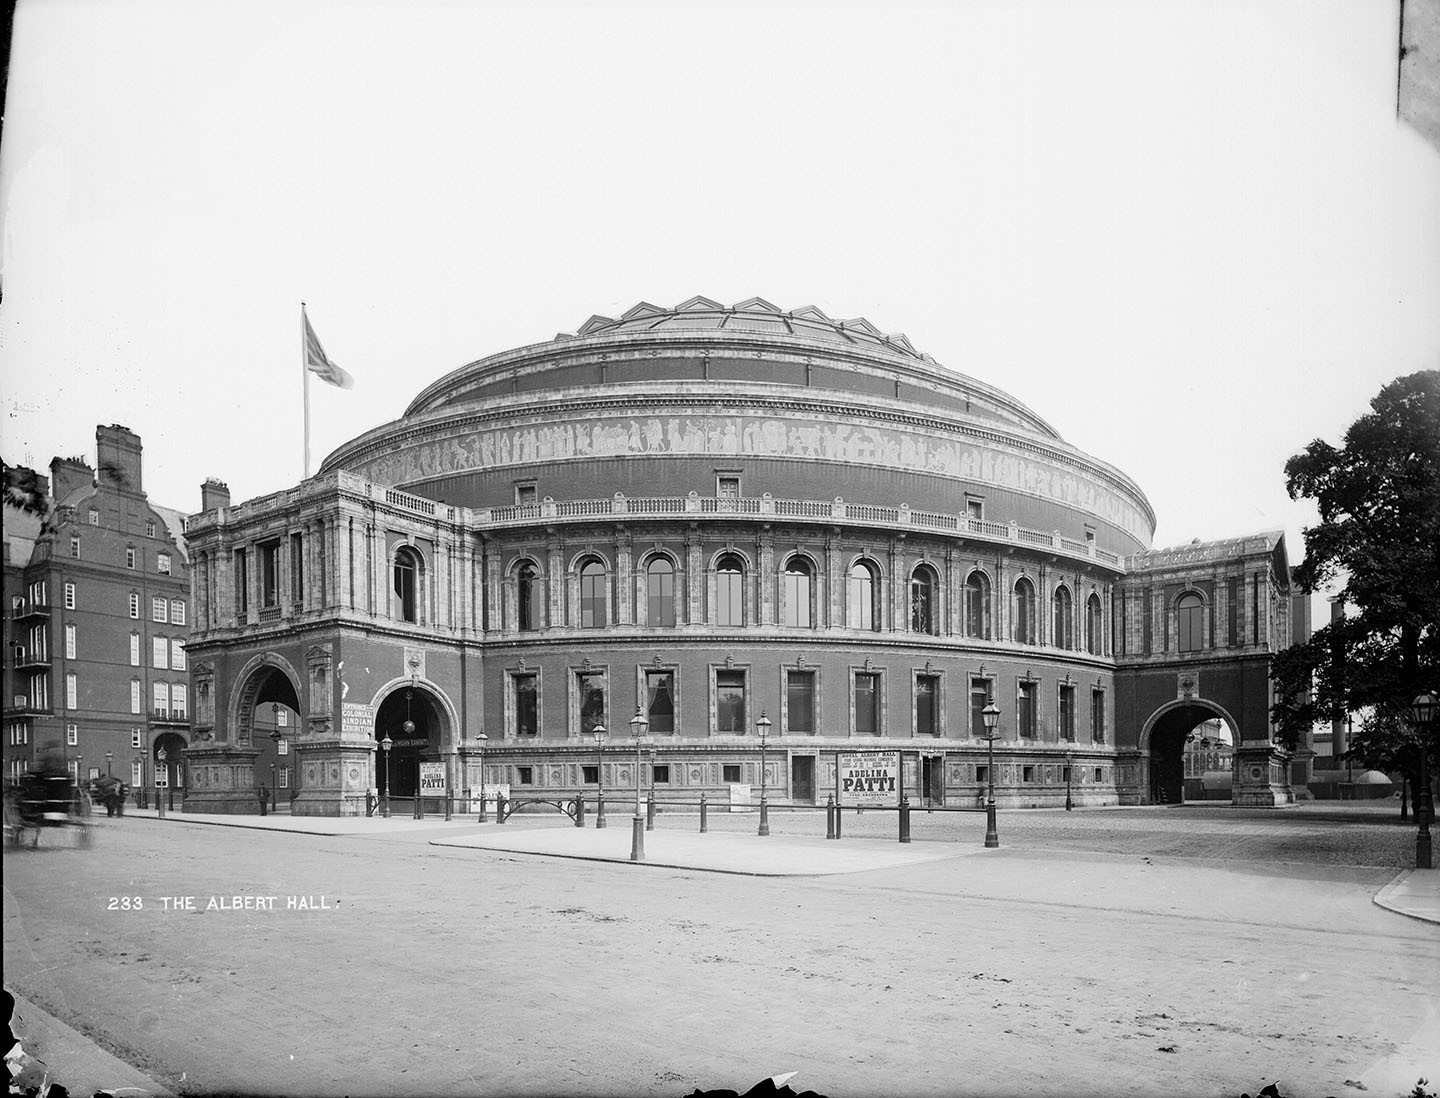 View of the Royal Albert Hall, taken in the late nineteenth century